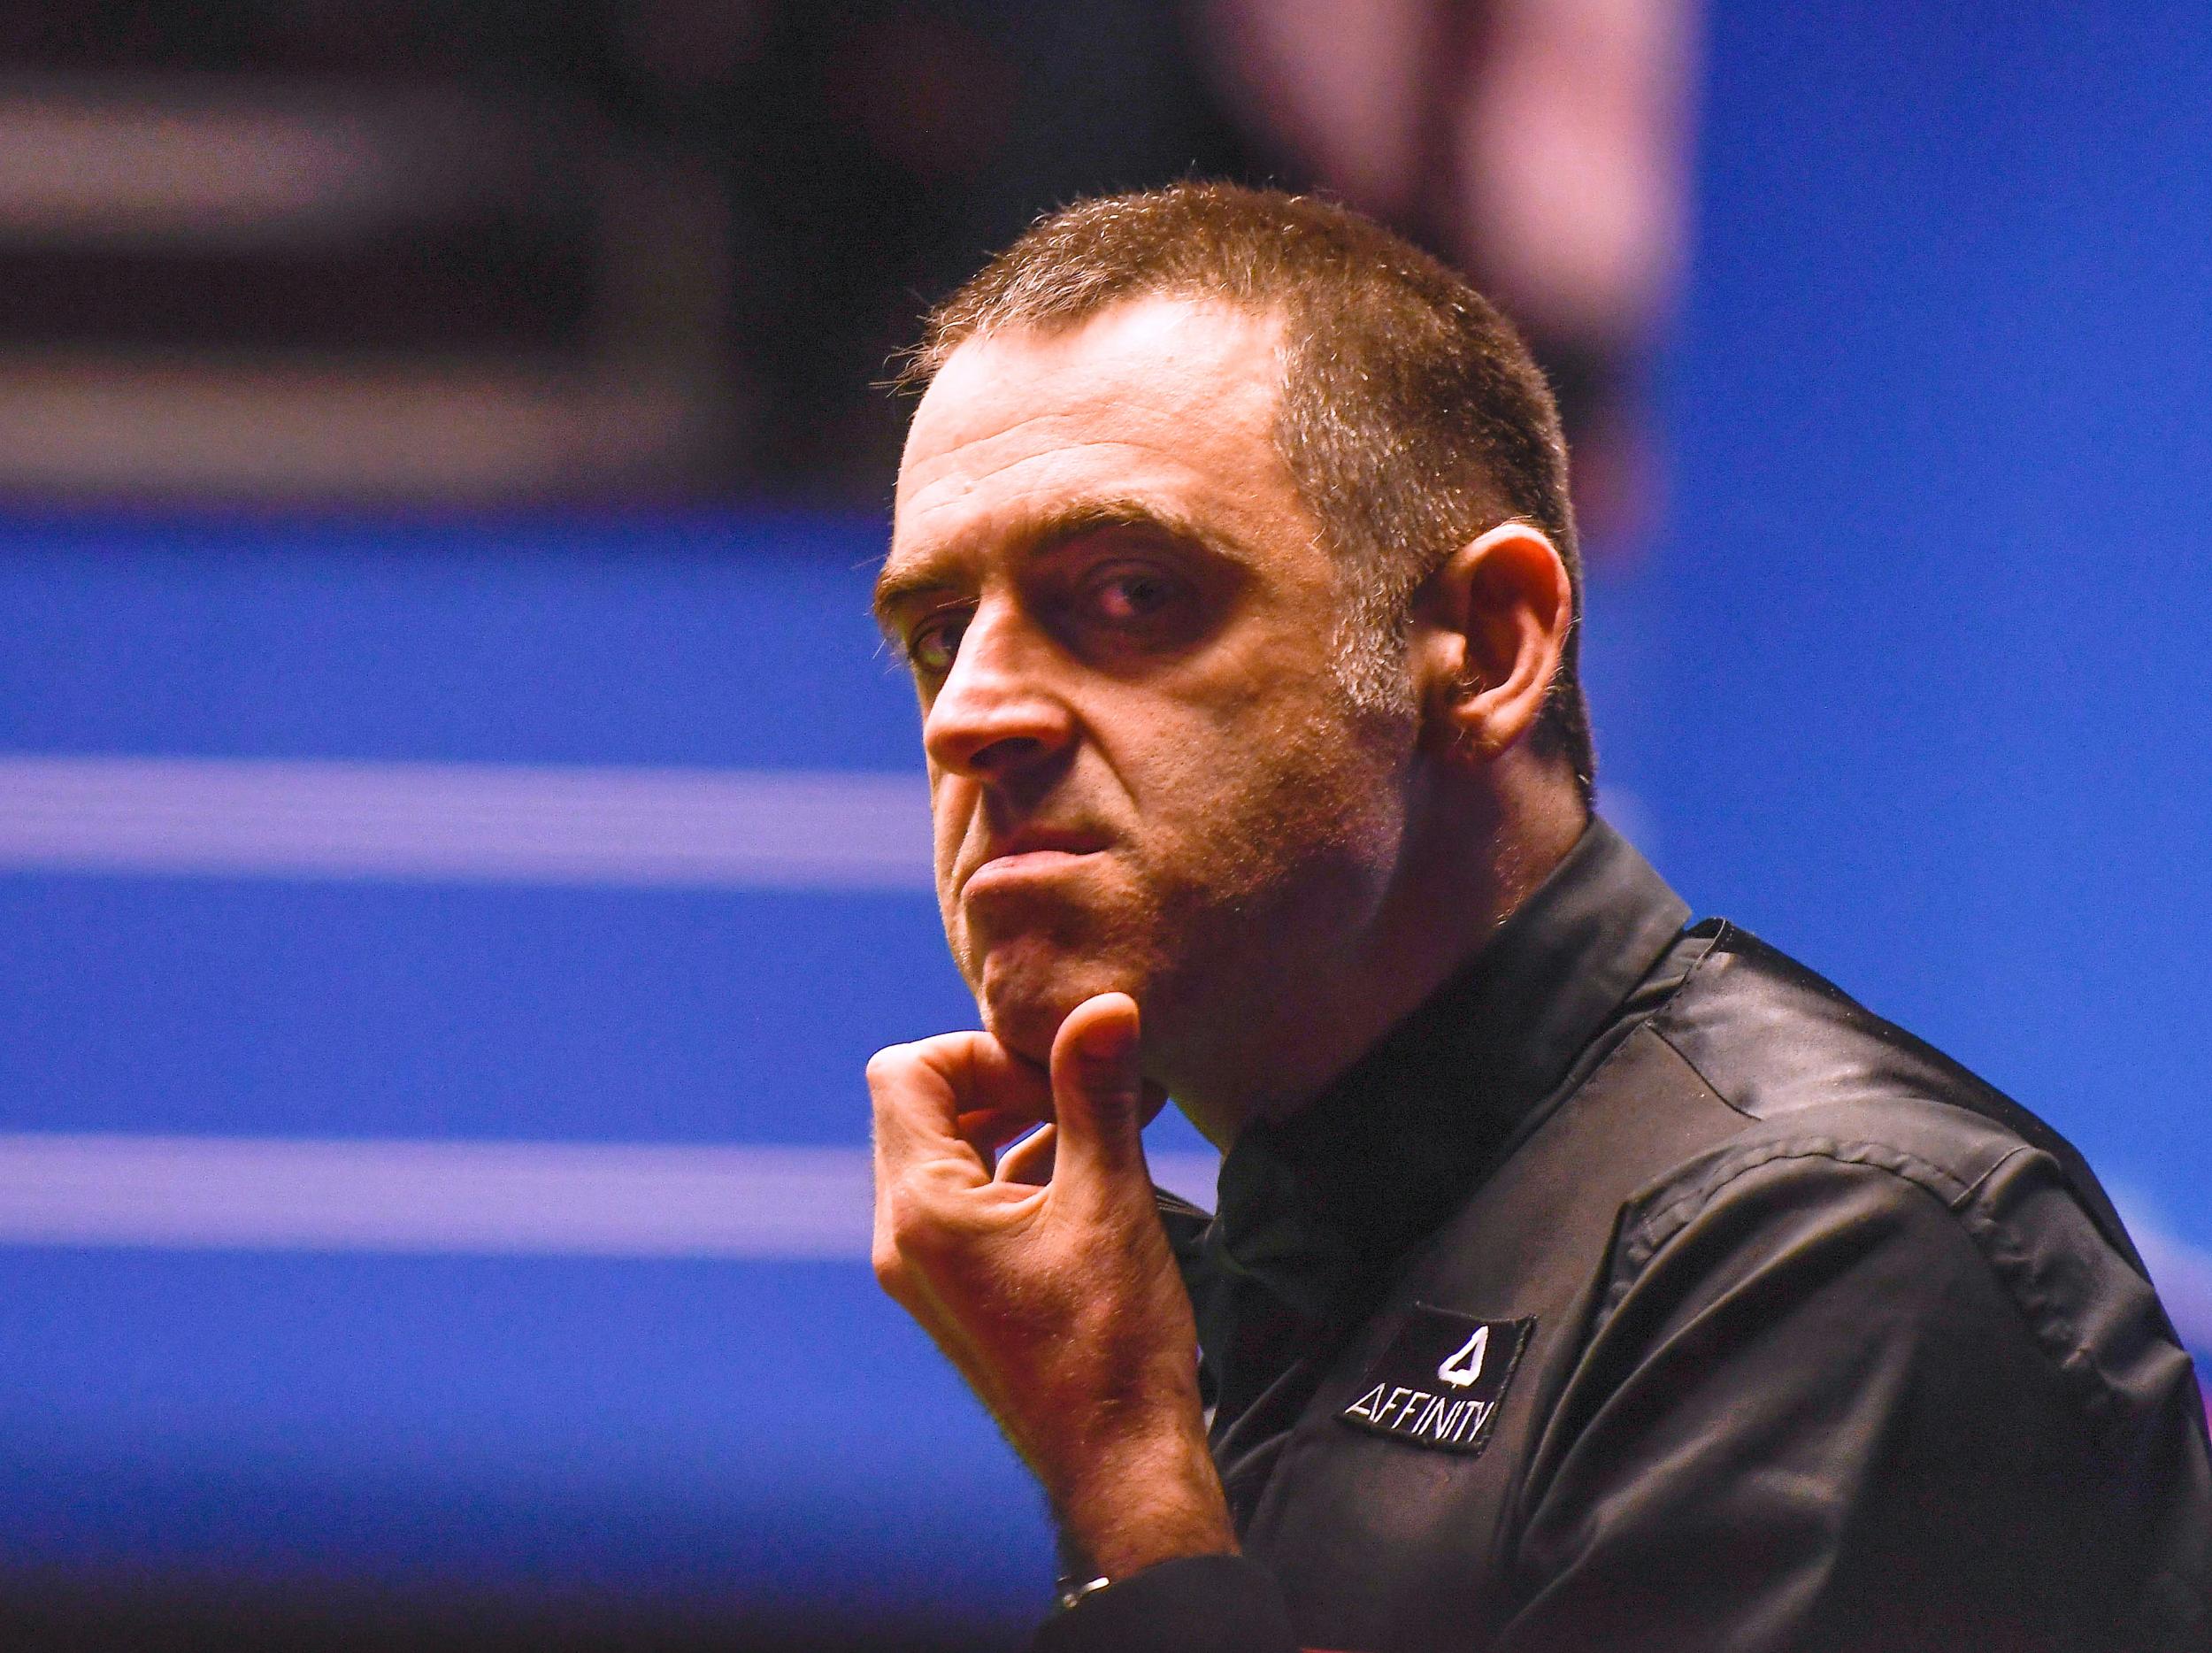 Ronnie O'Sullivan may not play at next year's tournament